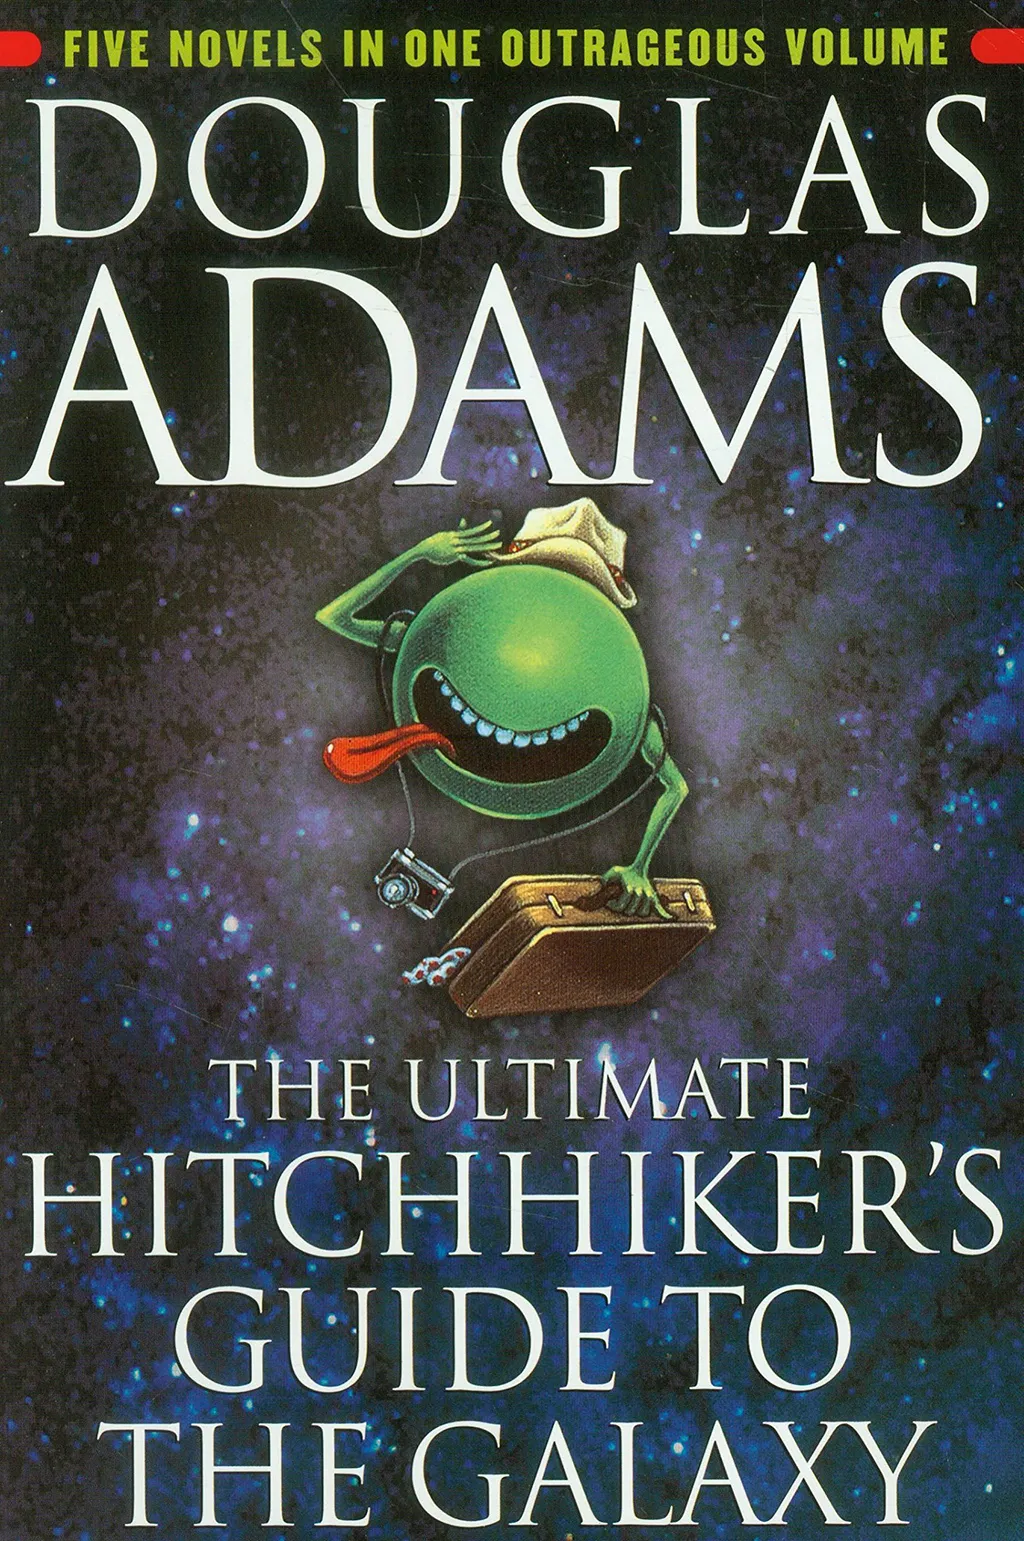 the ultimate hitchhiker's guide to the galaxy